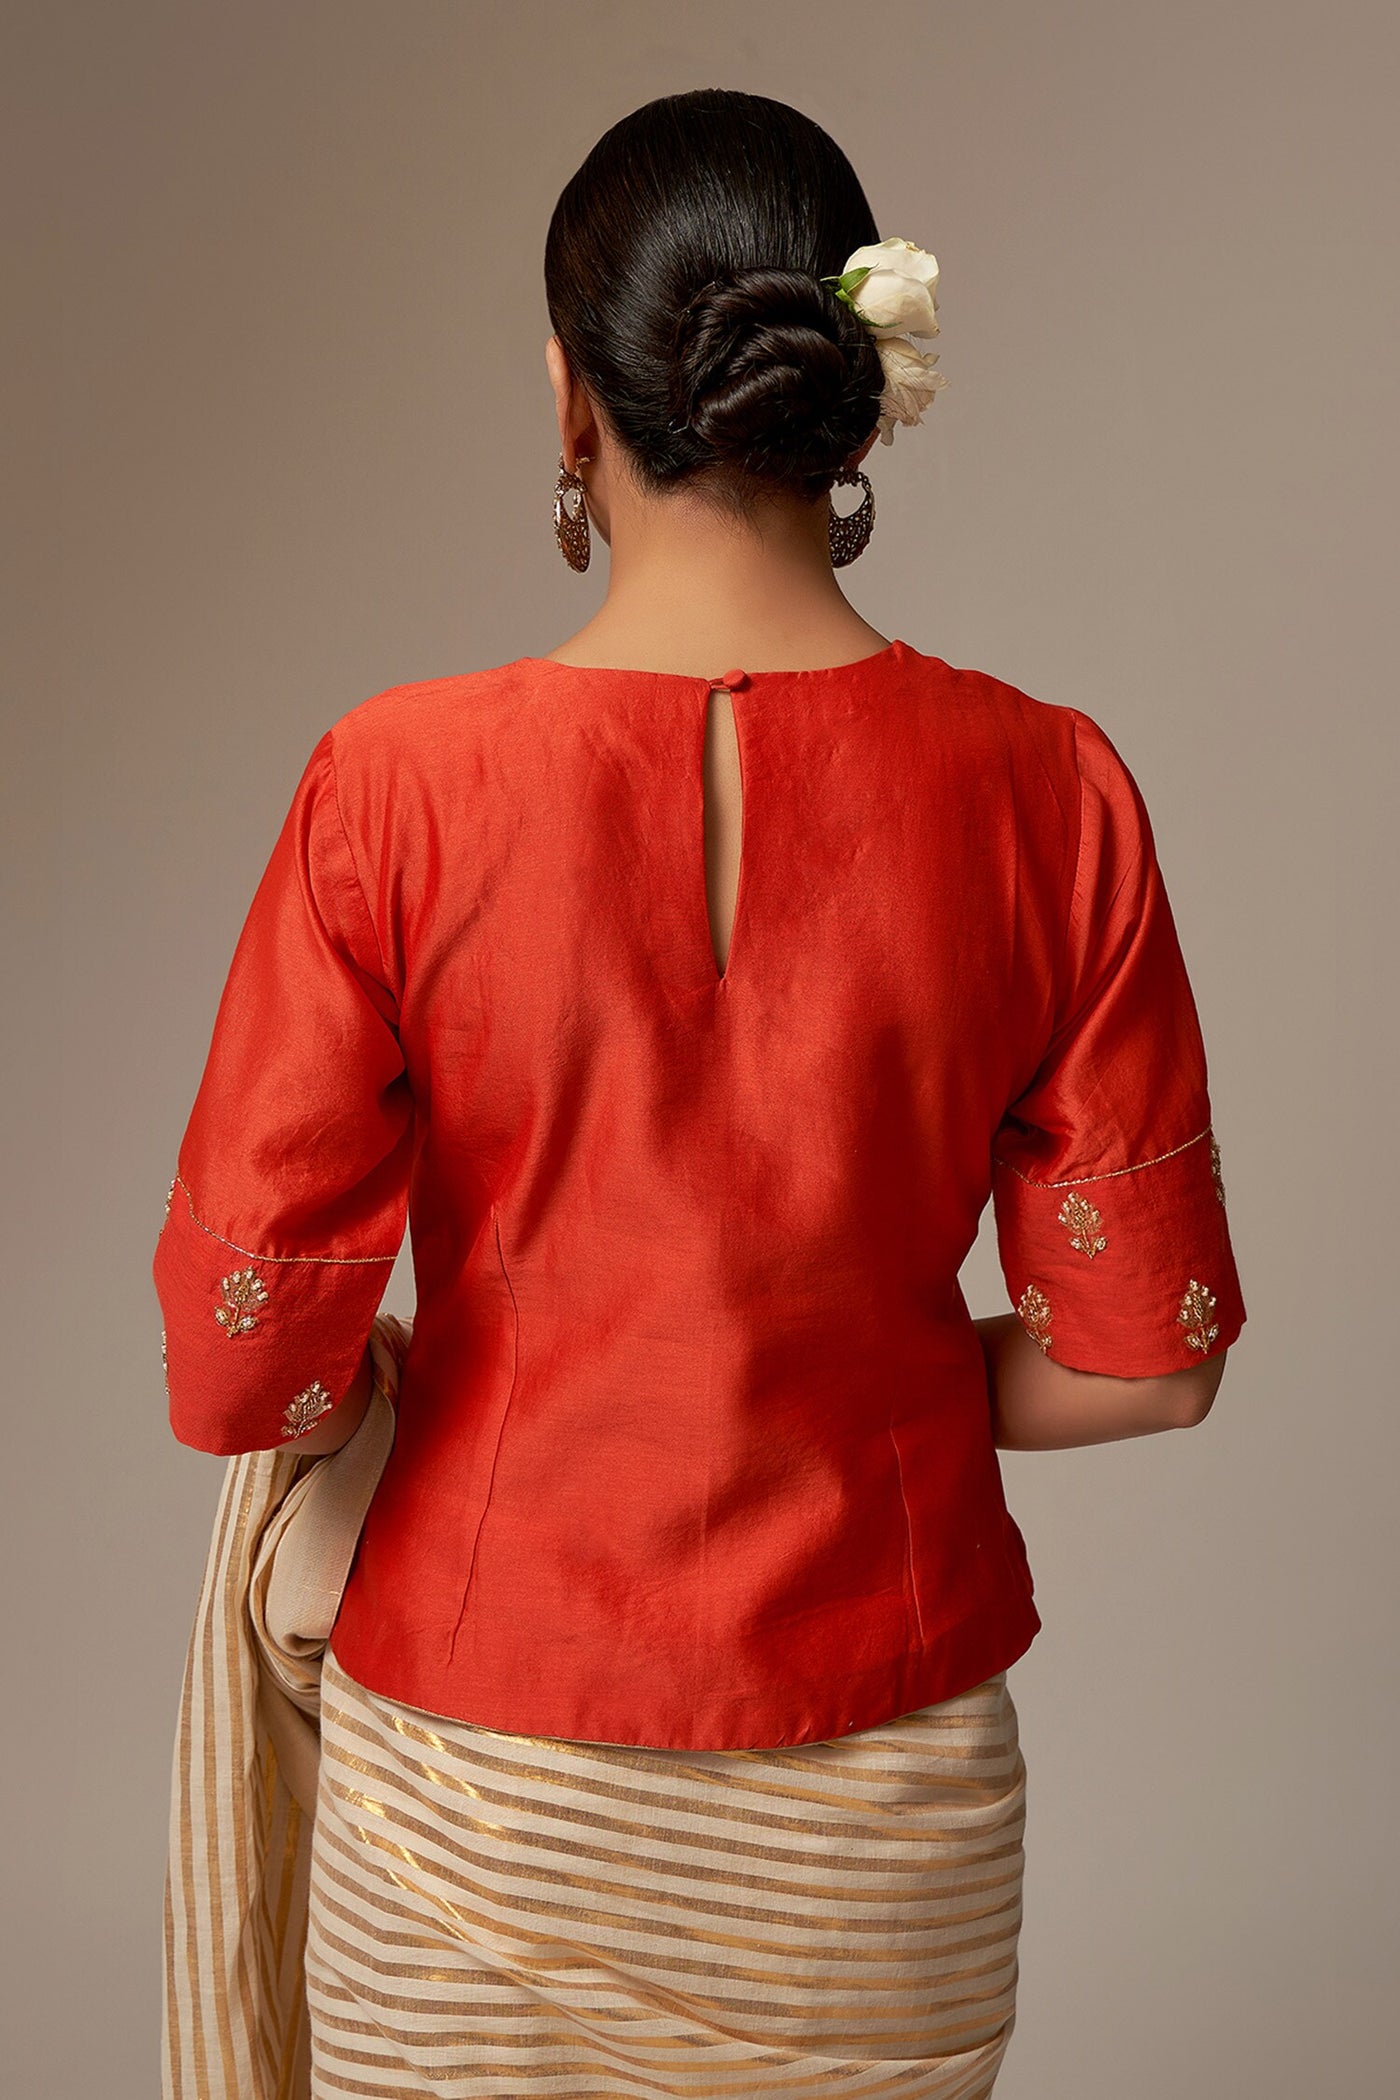 Orange Chanderi Silk Blouse - Indian Clothing in Denver, CO, Aurora, CO, Boulder, CO, Fort Collins, CO, Colorado Springs, CO, Parker, CO, Highlands Ranch, CO, Cherry Creek, CO, Centennial, CO, and Longmont, CO. Nationwide shipping USA - India Fashion X